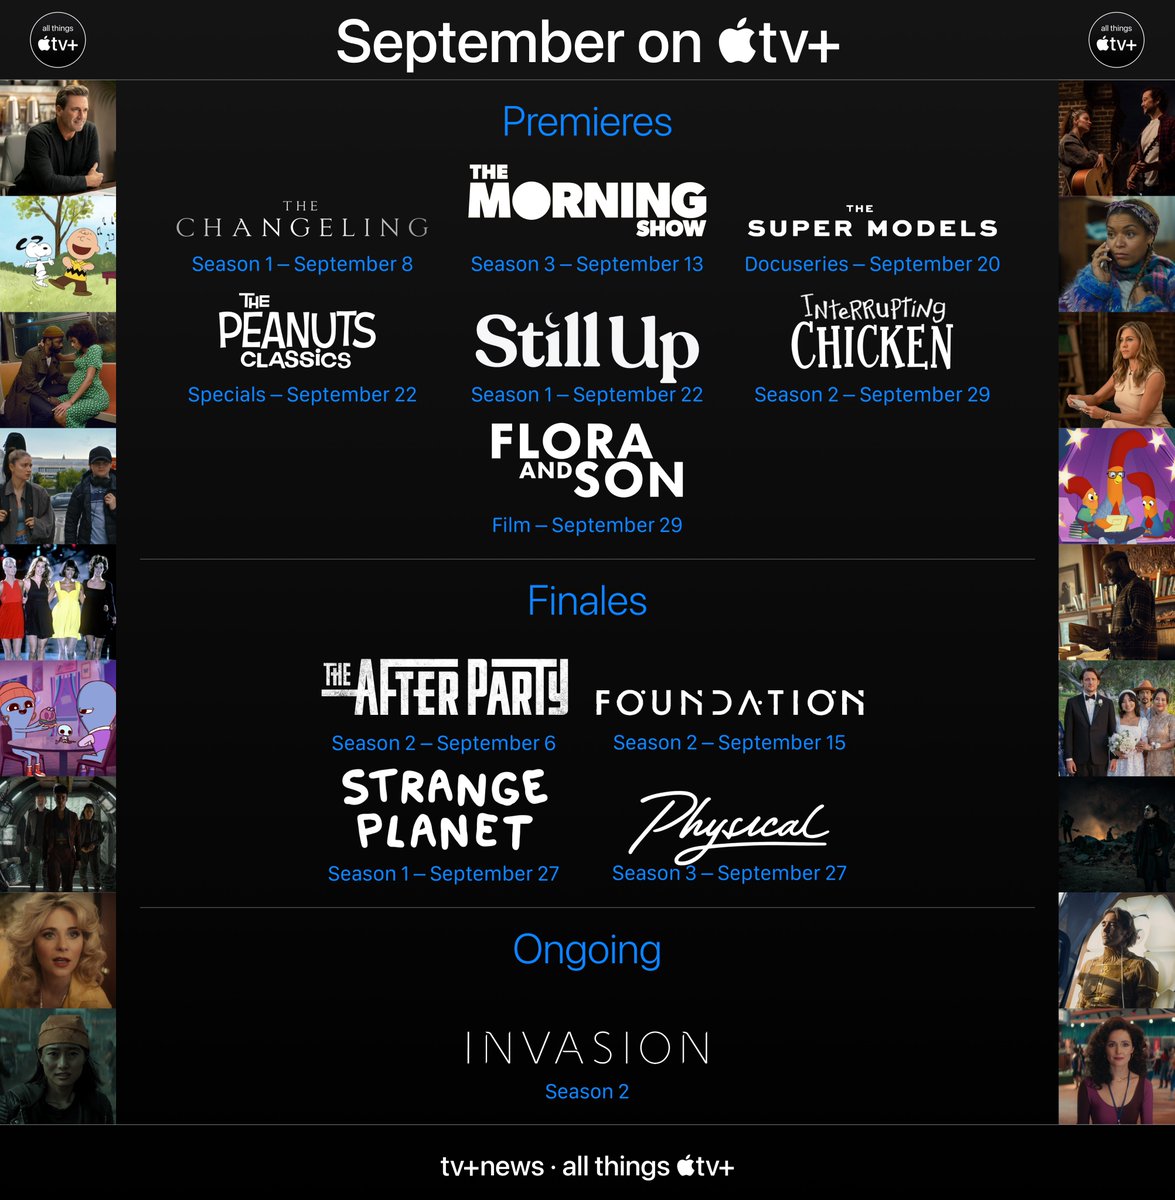 September on #AppleTVPlus:

Premieres:
#TheChangeling, #TheMorningShow S3, #TheSuperModels, #StillUp, #InterruptingChicken S2, #FloraAndSon & more

Finales:
#TheAfterparty S2, #Foundation S2, #StrangePlanet & #Physical S3

Ongoing:
#Invasion S2

What are you most excited for?